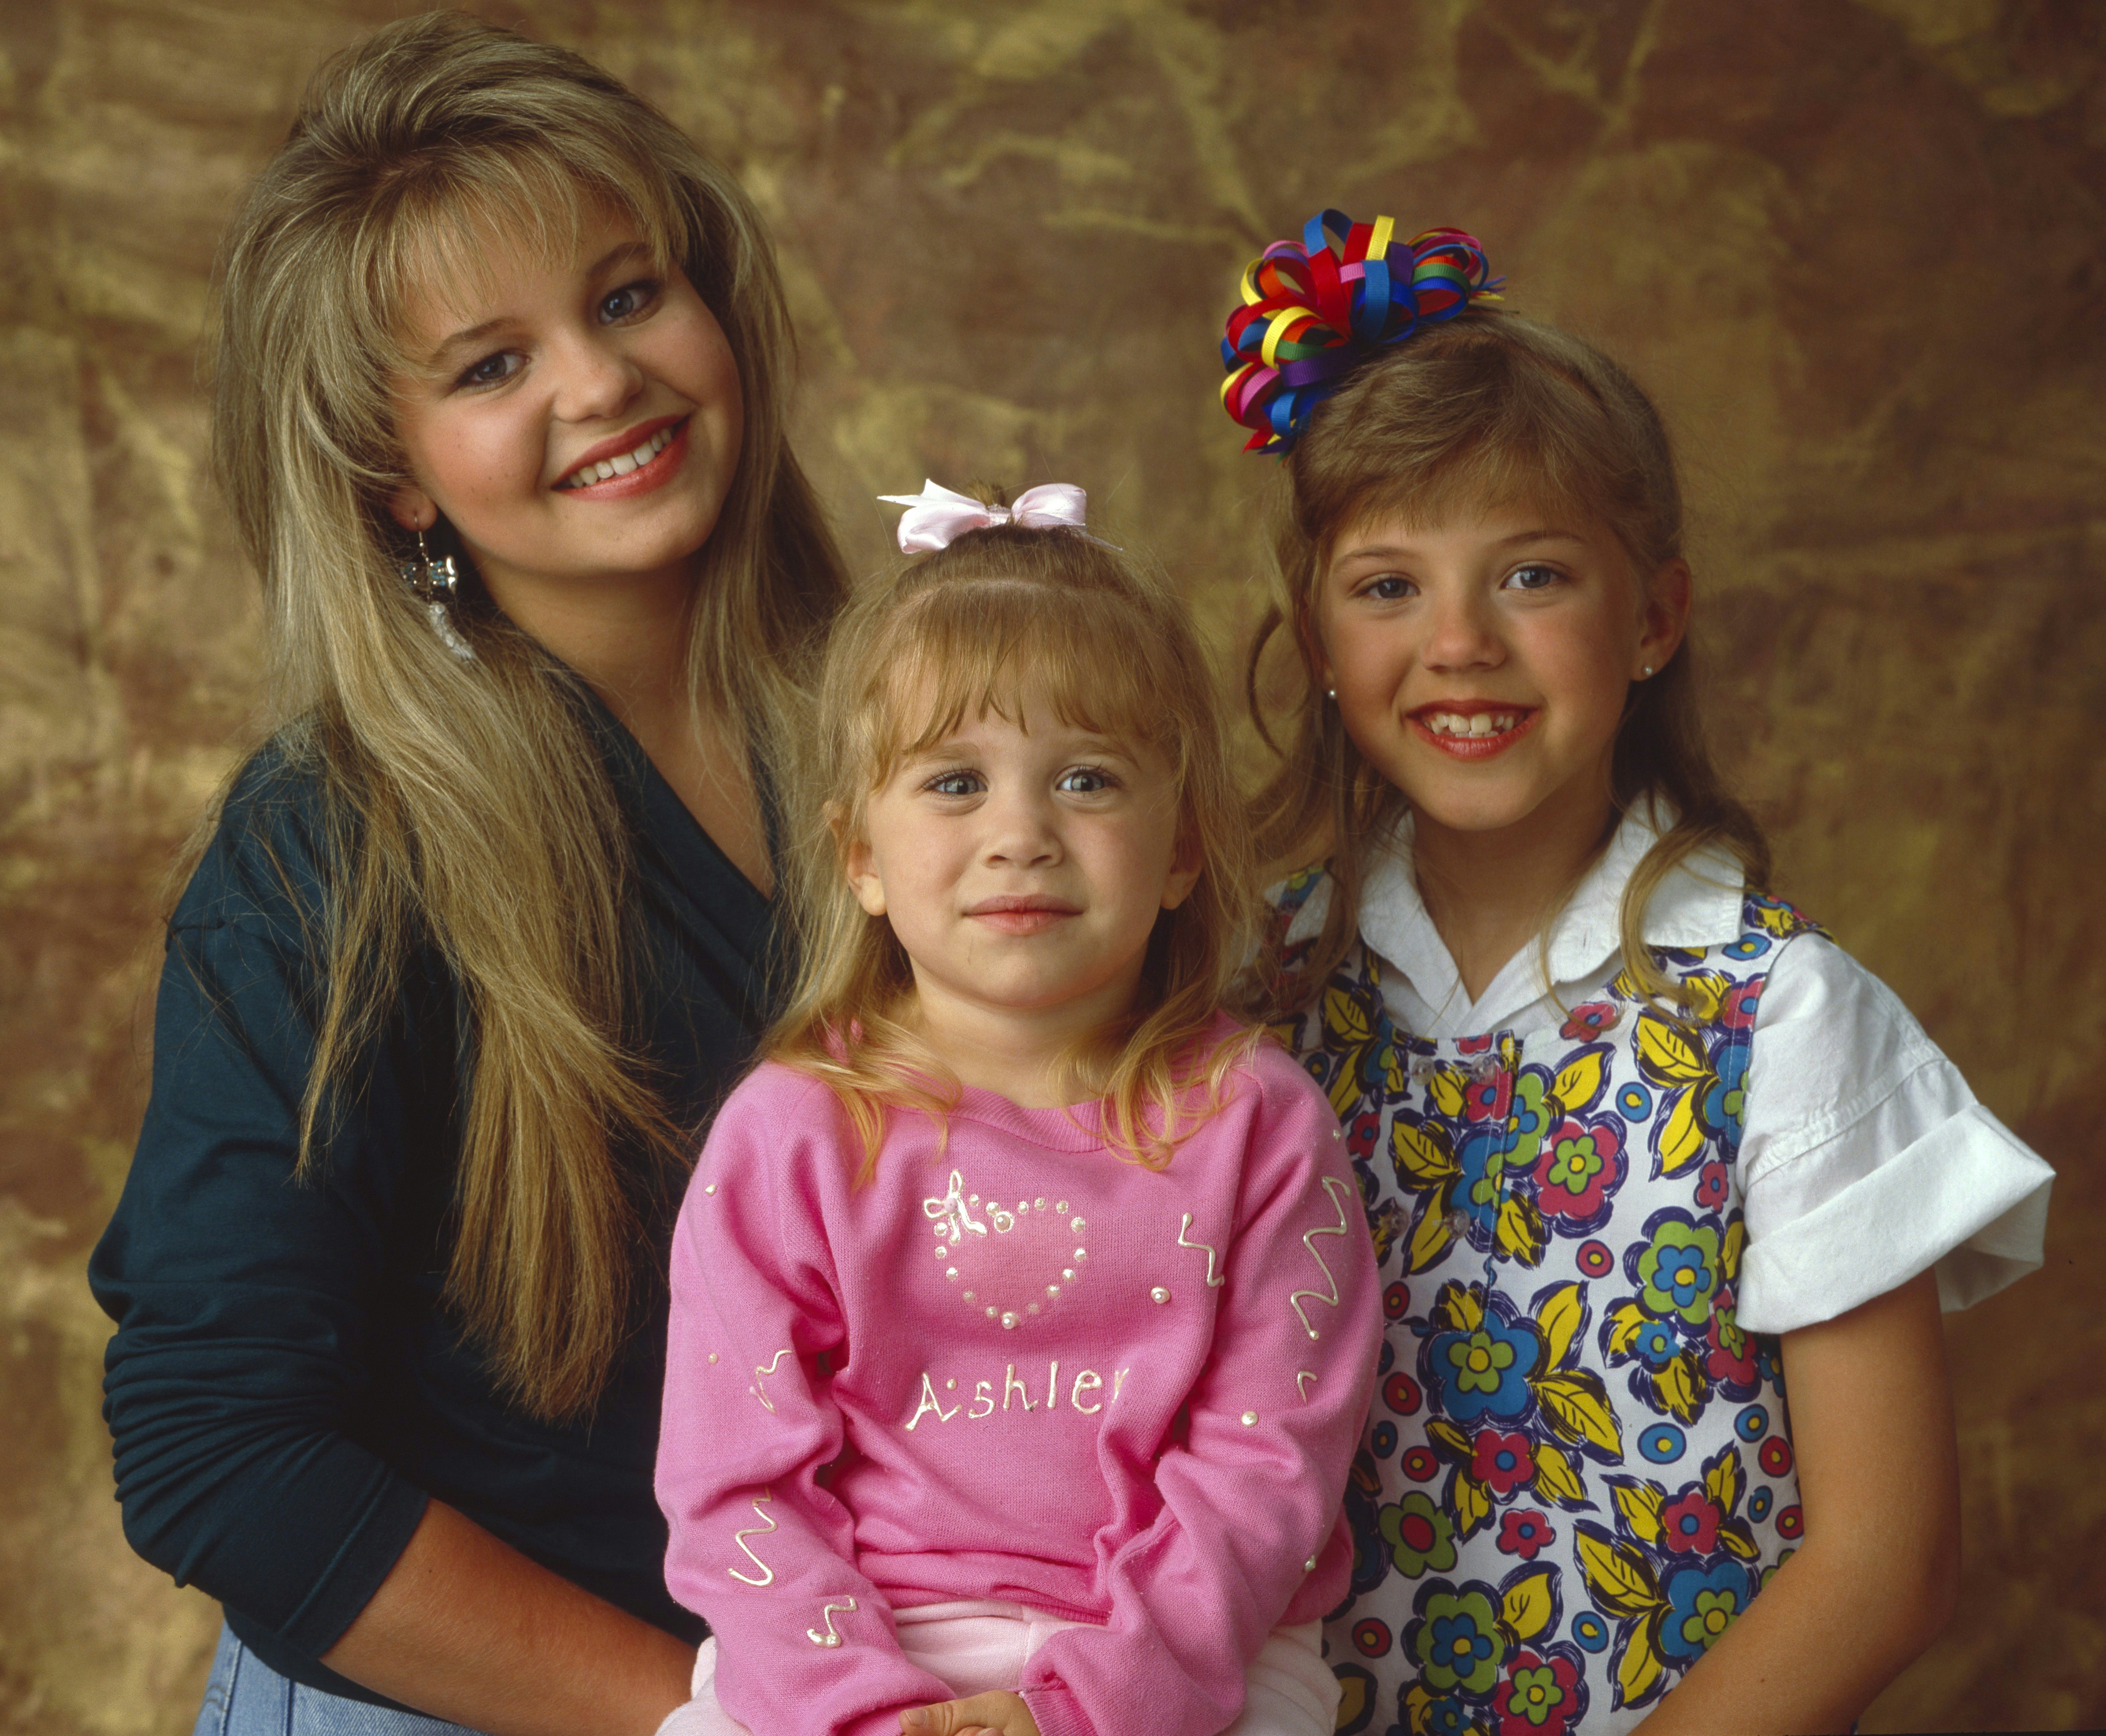 13 Full House Scrunchie Hairstyles That Will Make You Miss The